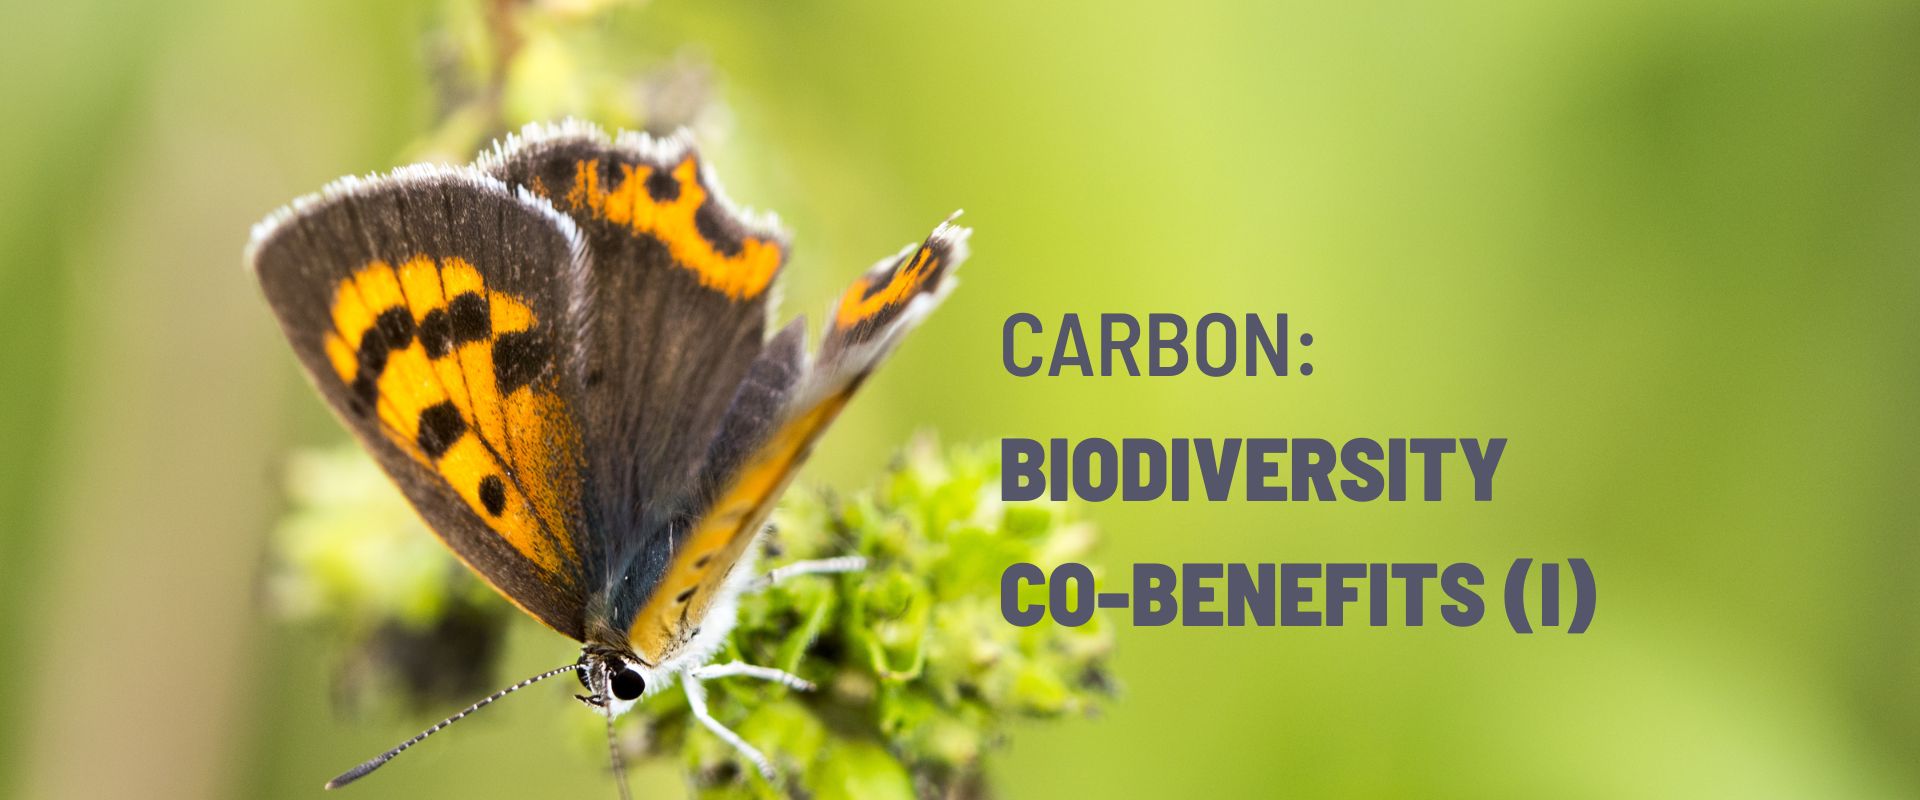 Carbon: Measuring and Valuing Biodiversity Co-Benefits (Part 1)